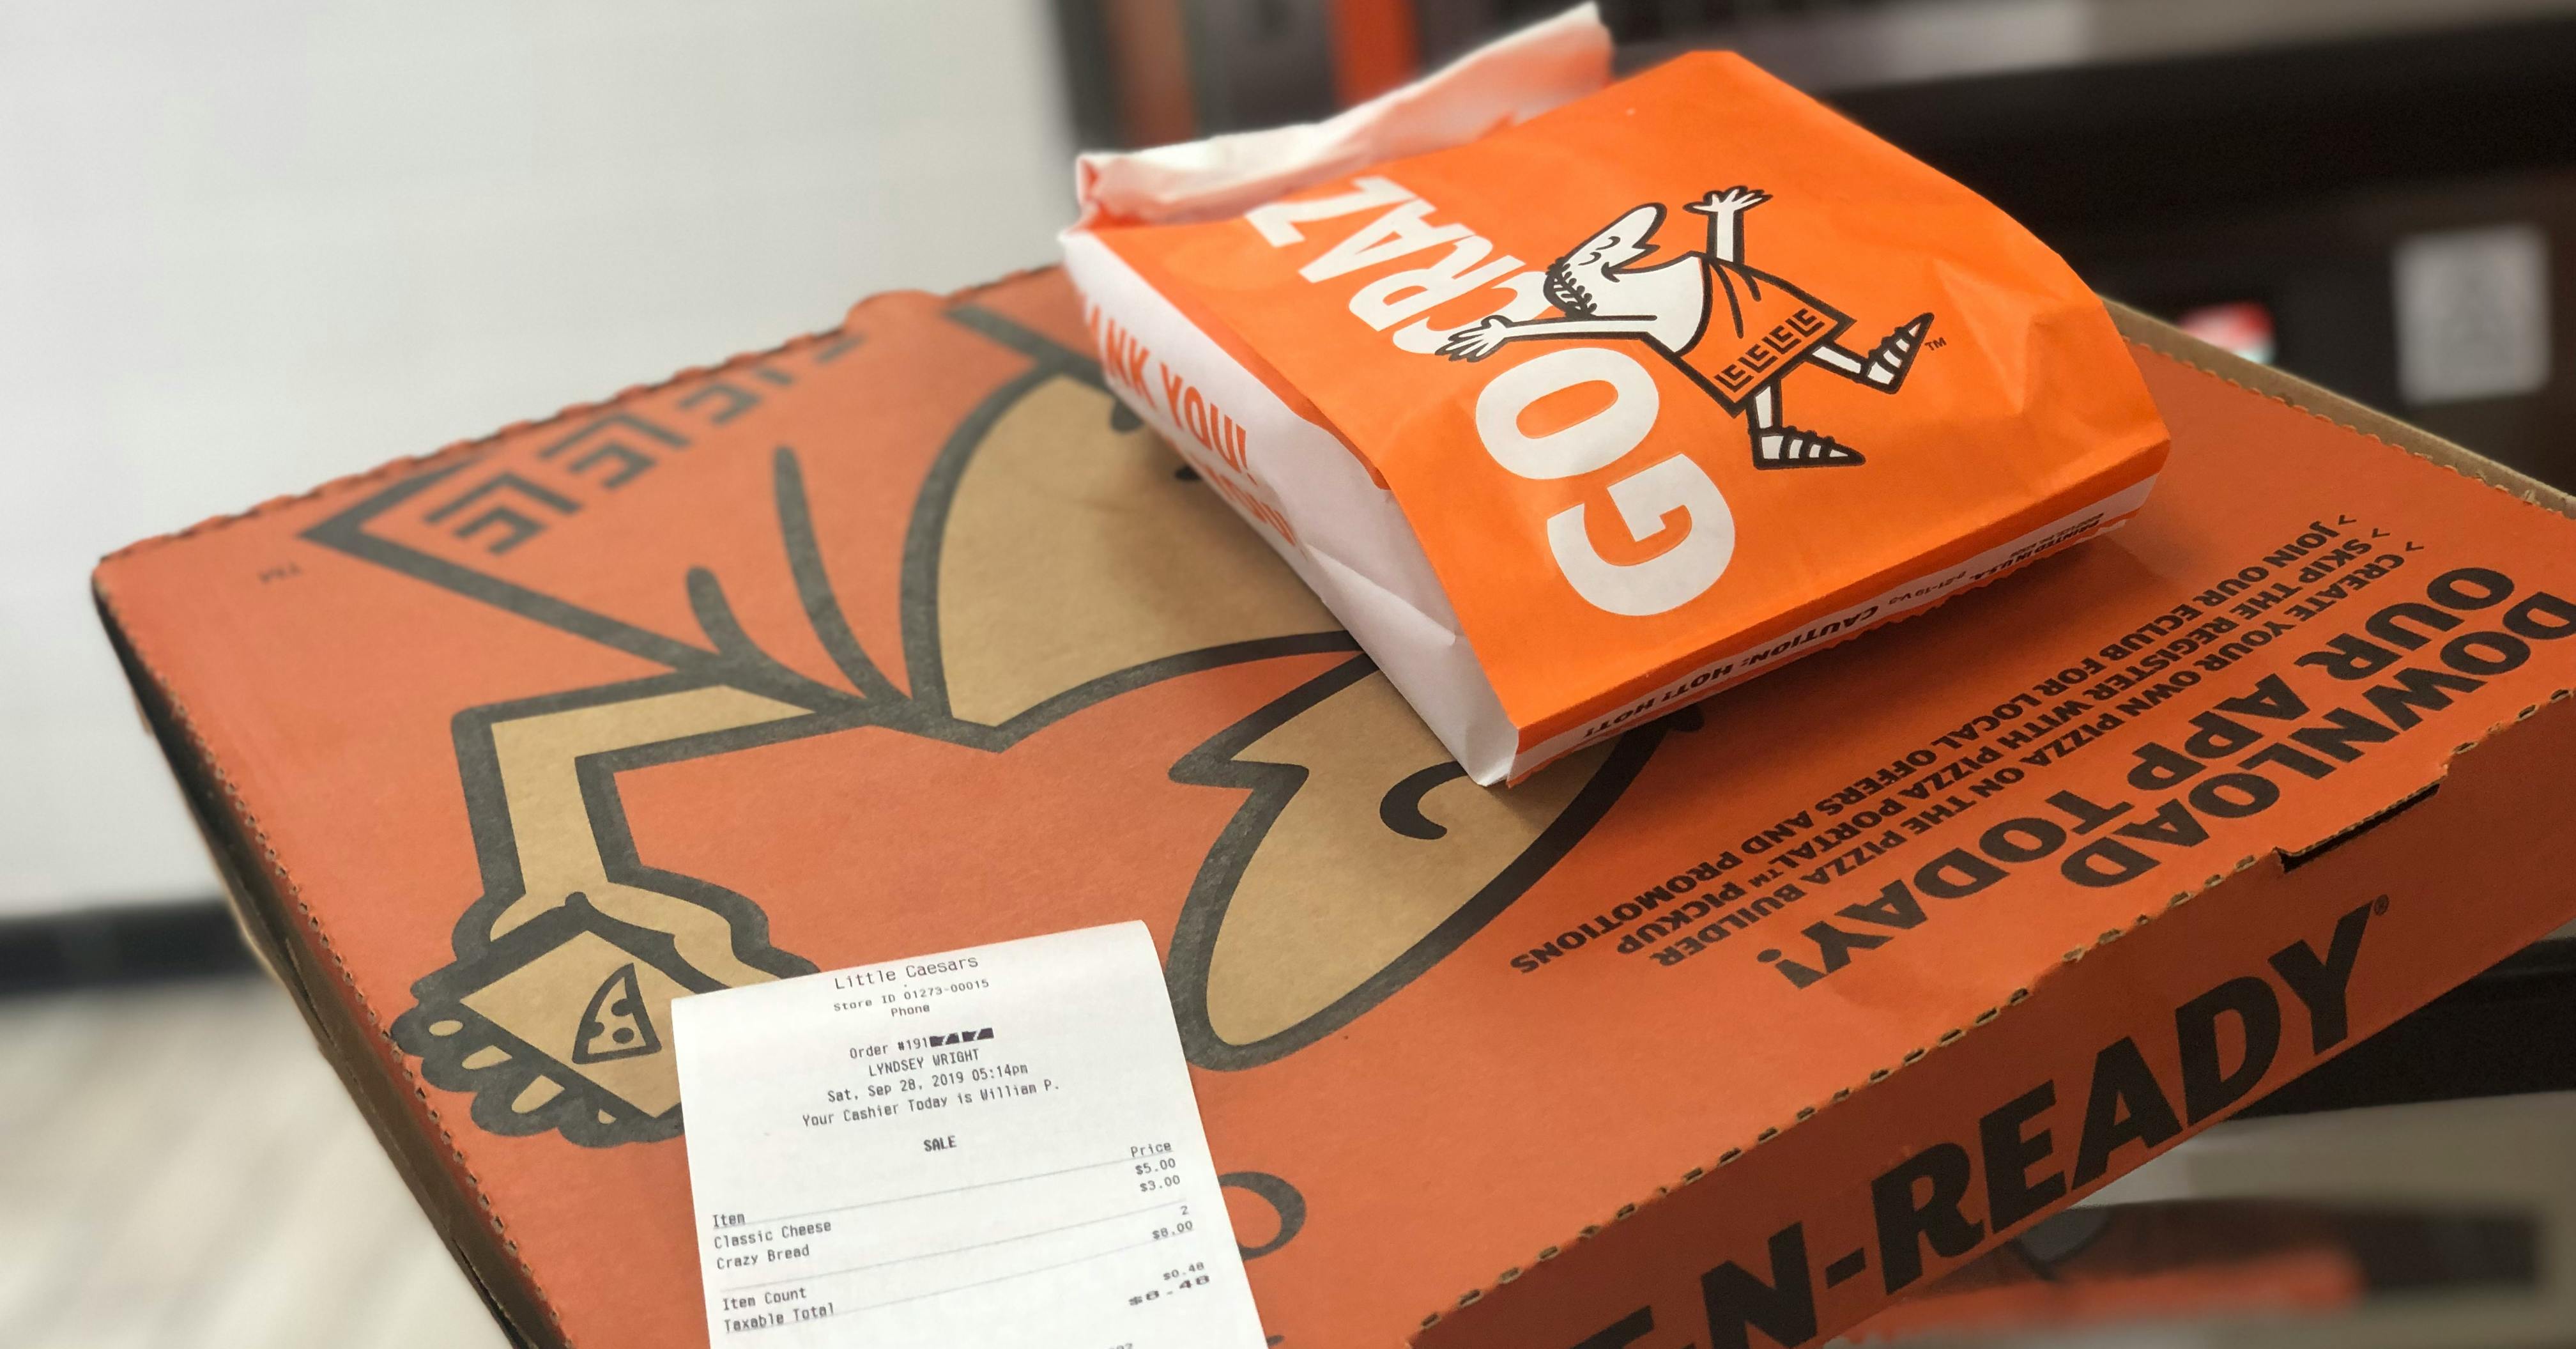 17 Genius Tips to Get Little Caesars Deals and Coupons - The Krazy